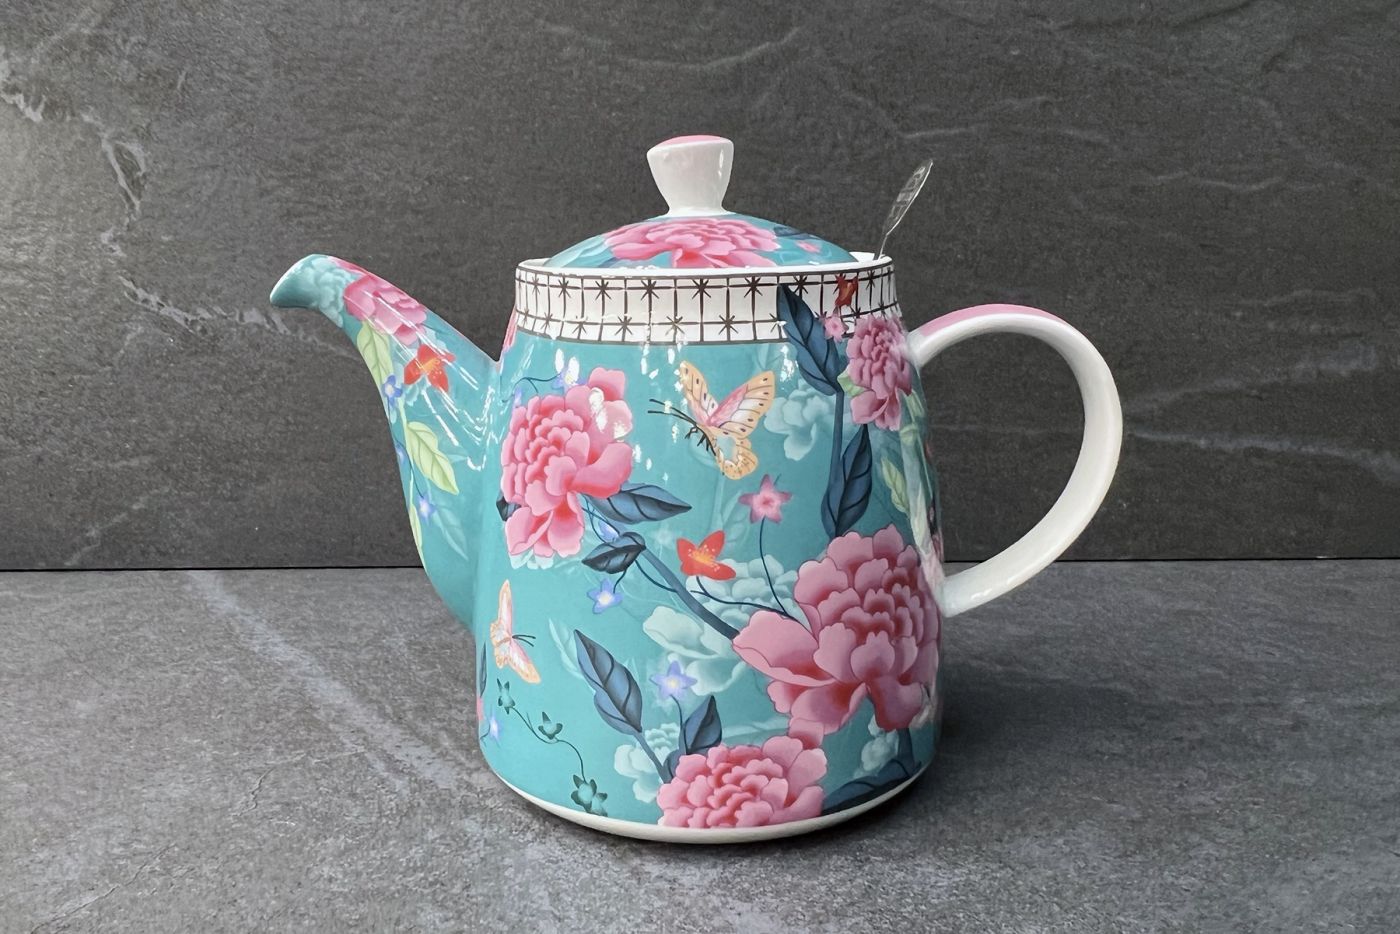 Bell Infuser 4 Cup Teapot Teal